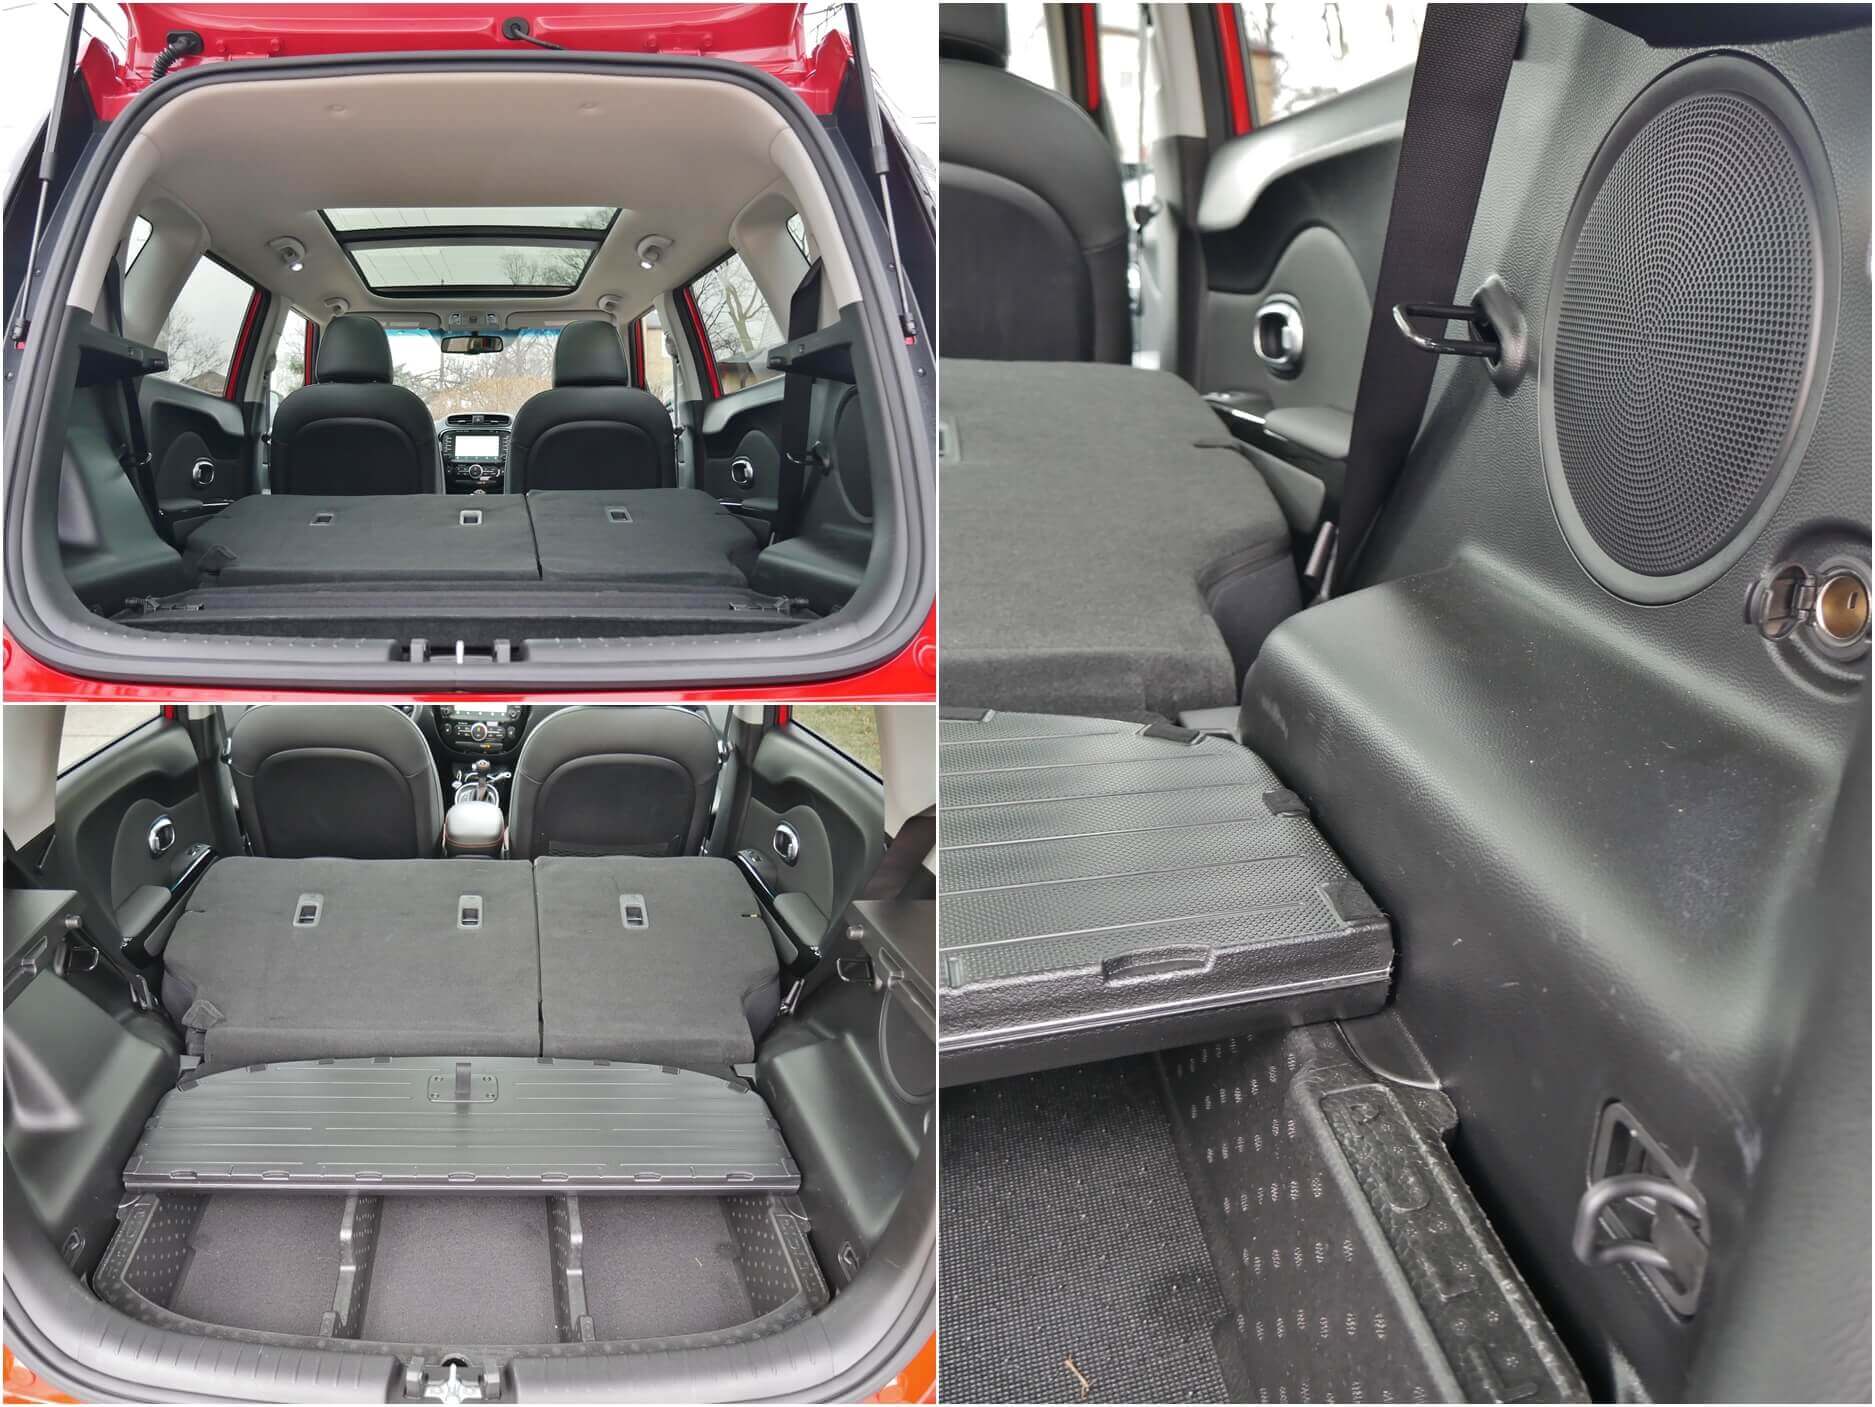 2017 Kia Soul Exclaim Turbo: cargo area w/ sub load-floor cargo management tray, tied-down hooks and 12V power port